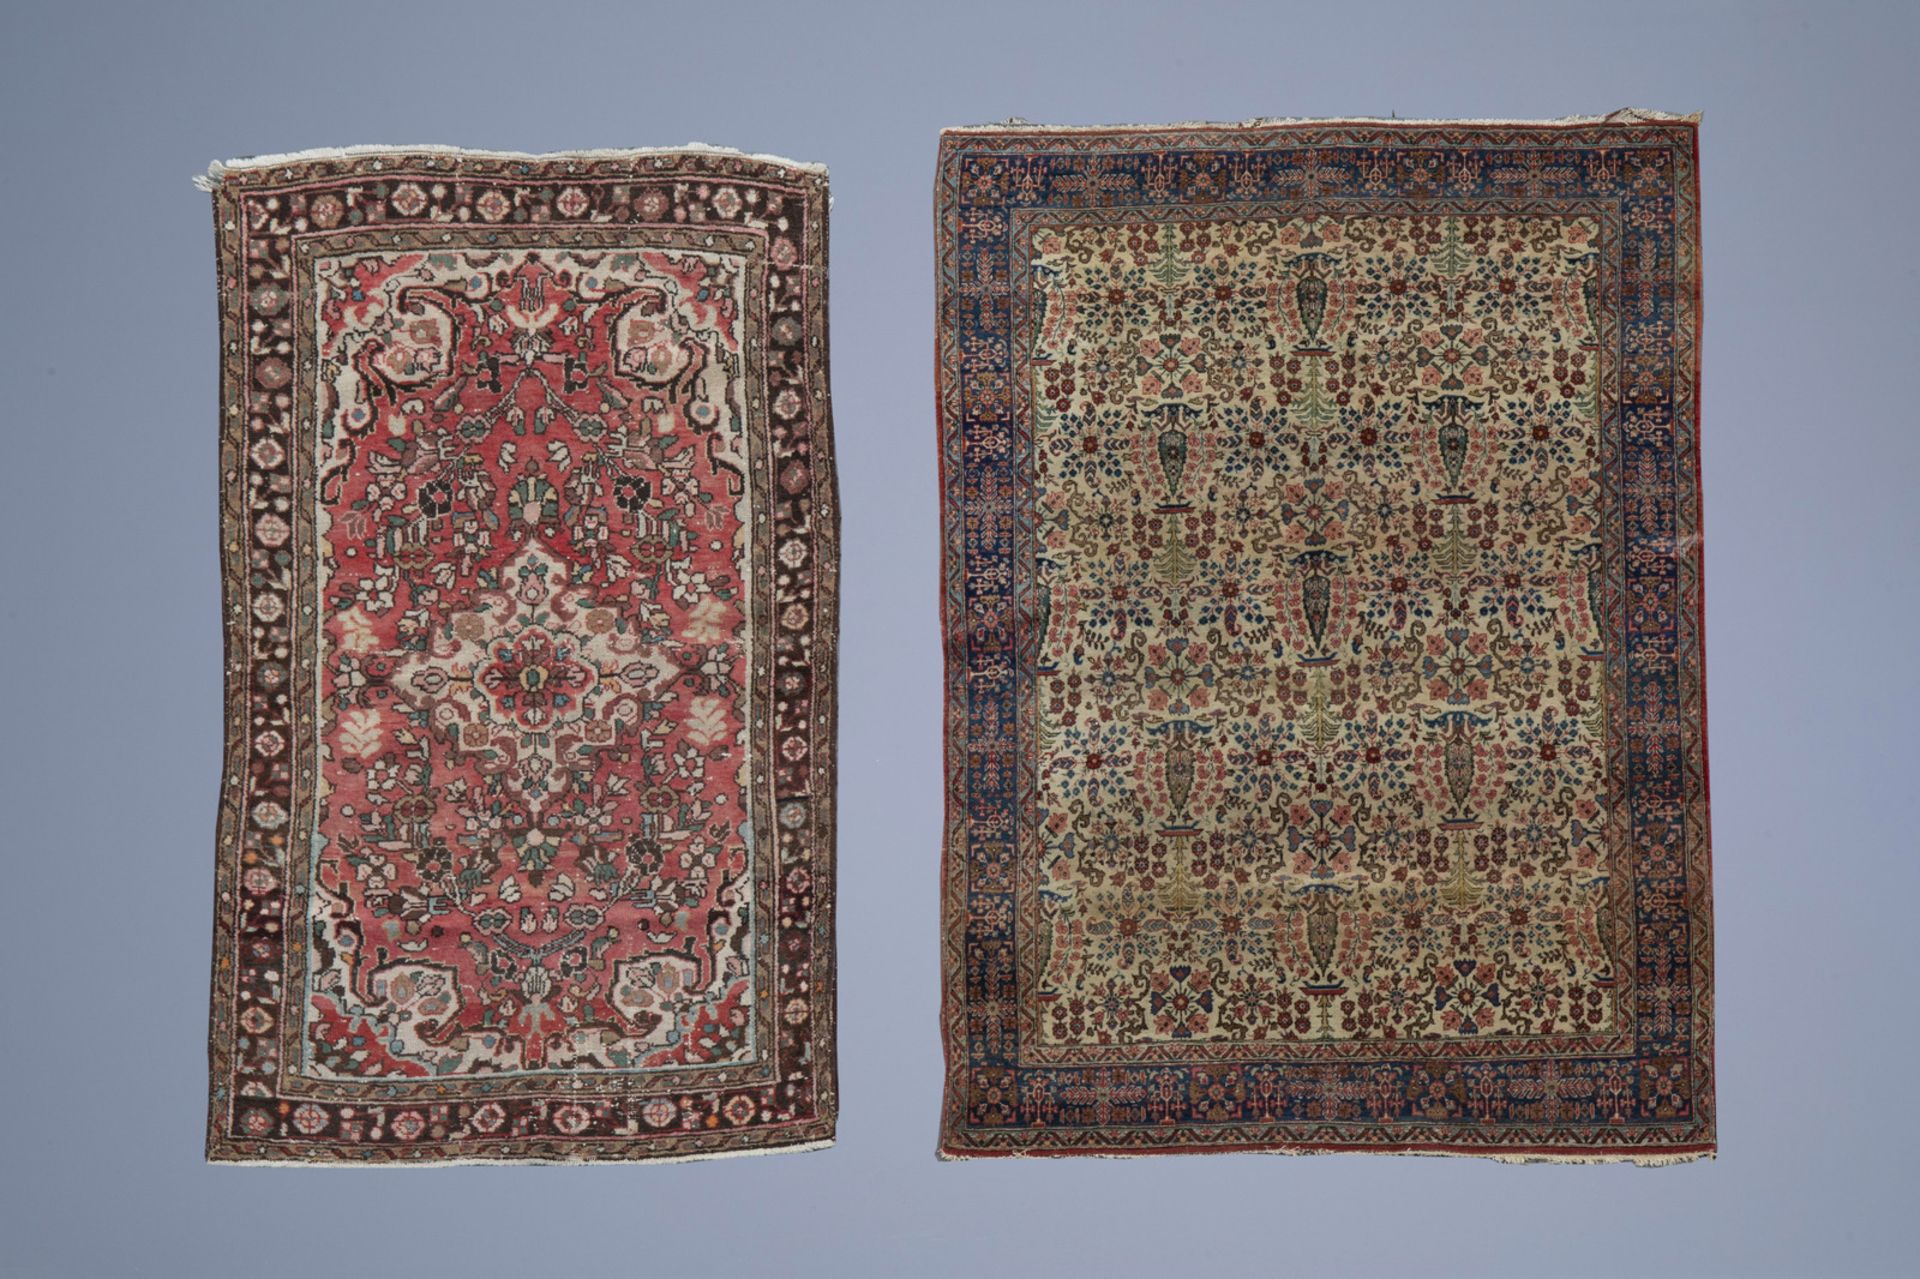 Two Oriental rugs with floral design, wool on cotton, 20th C.